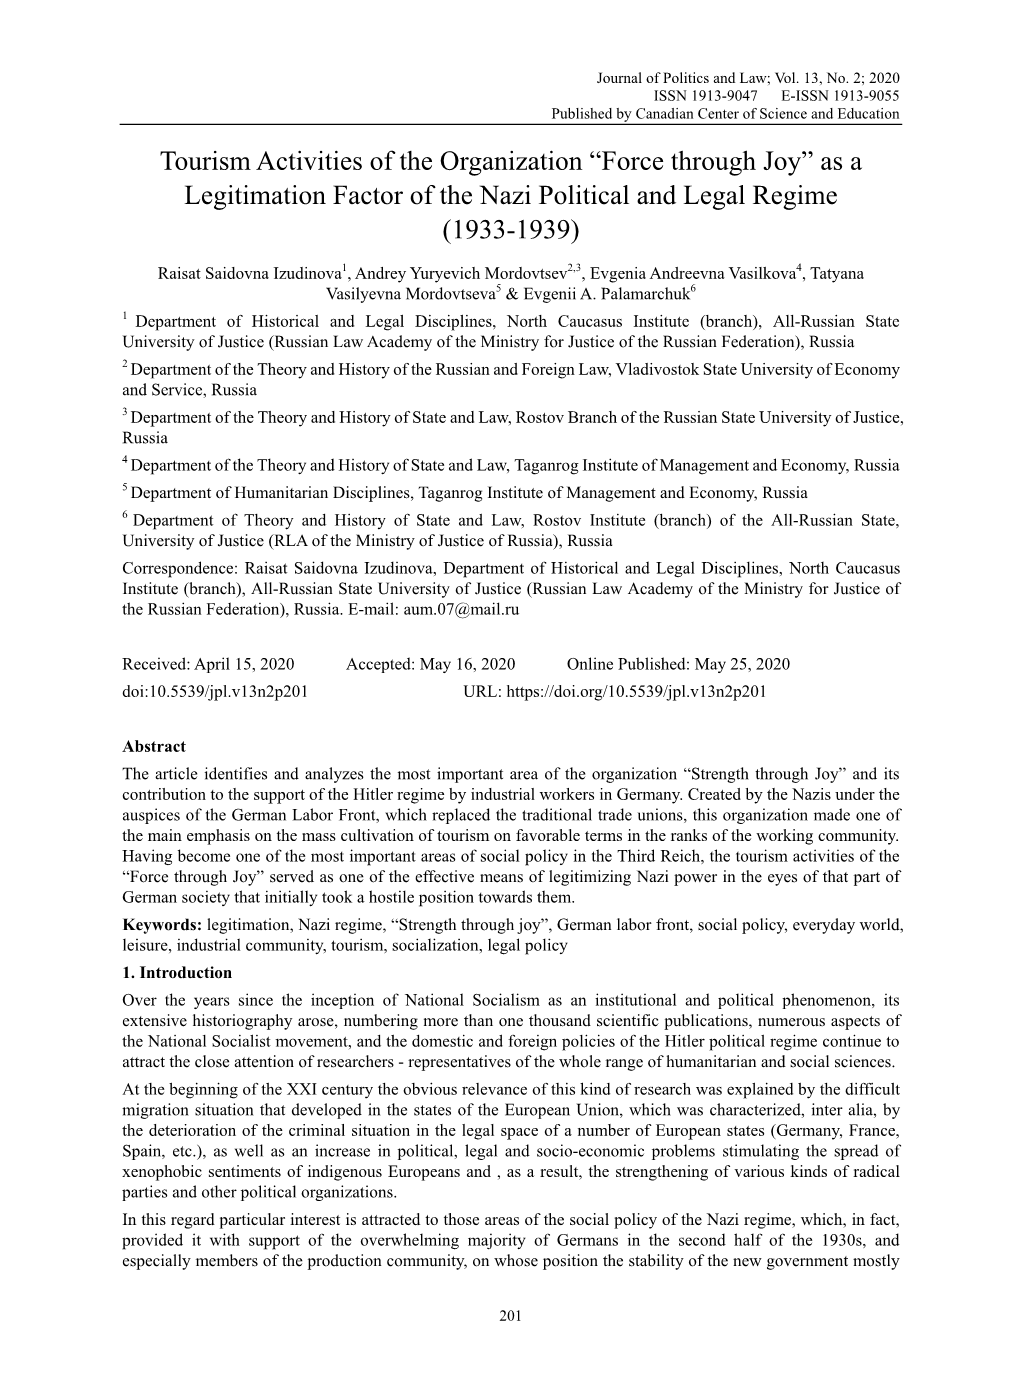 As a Legitimation Factor of the Nazi Political and Legal Regime (1933-1939)